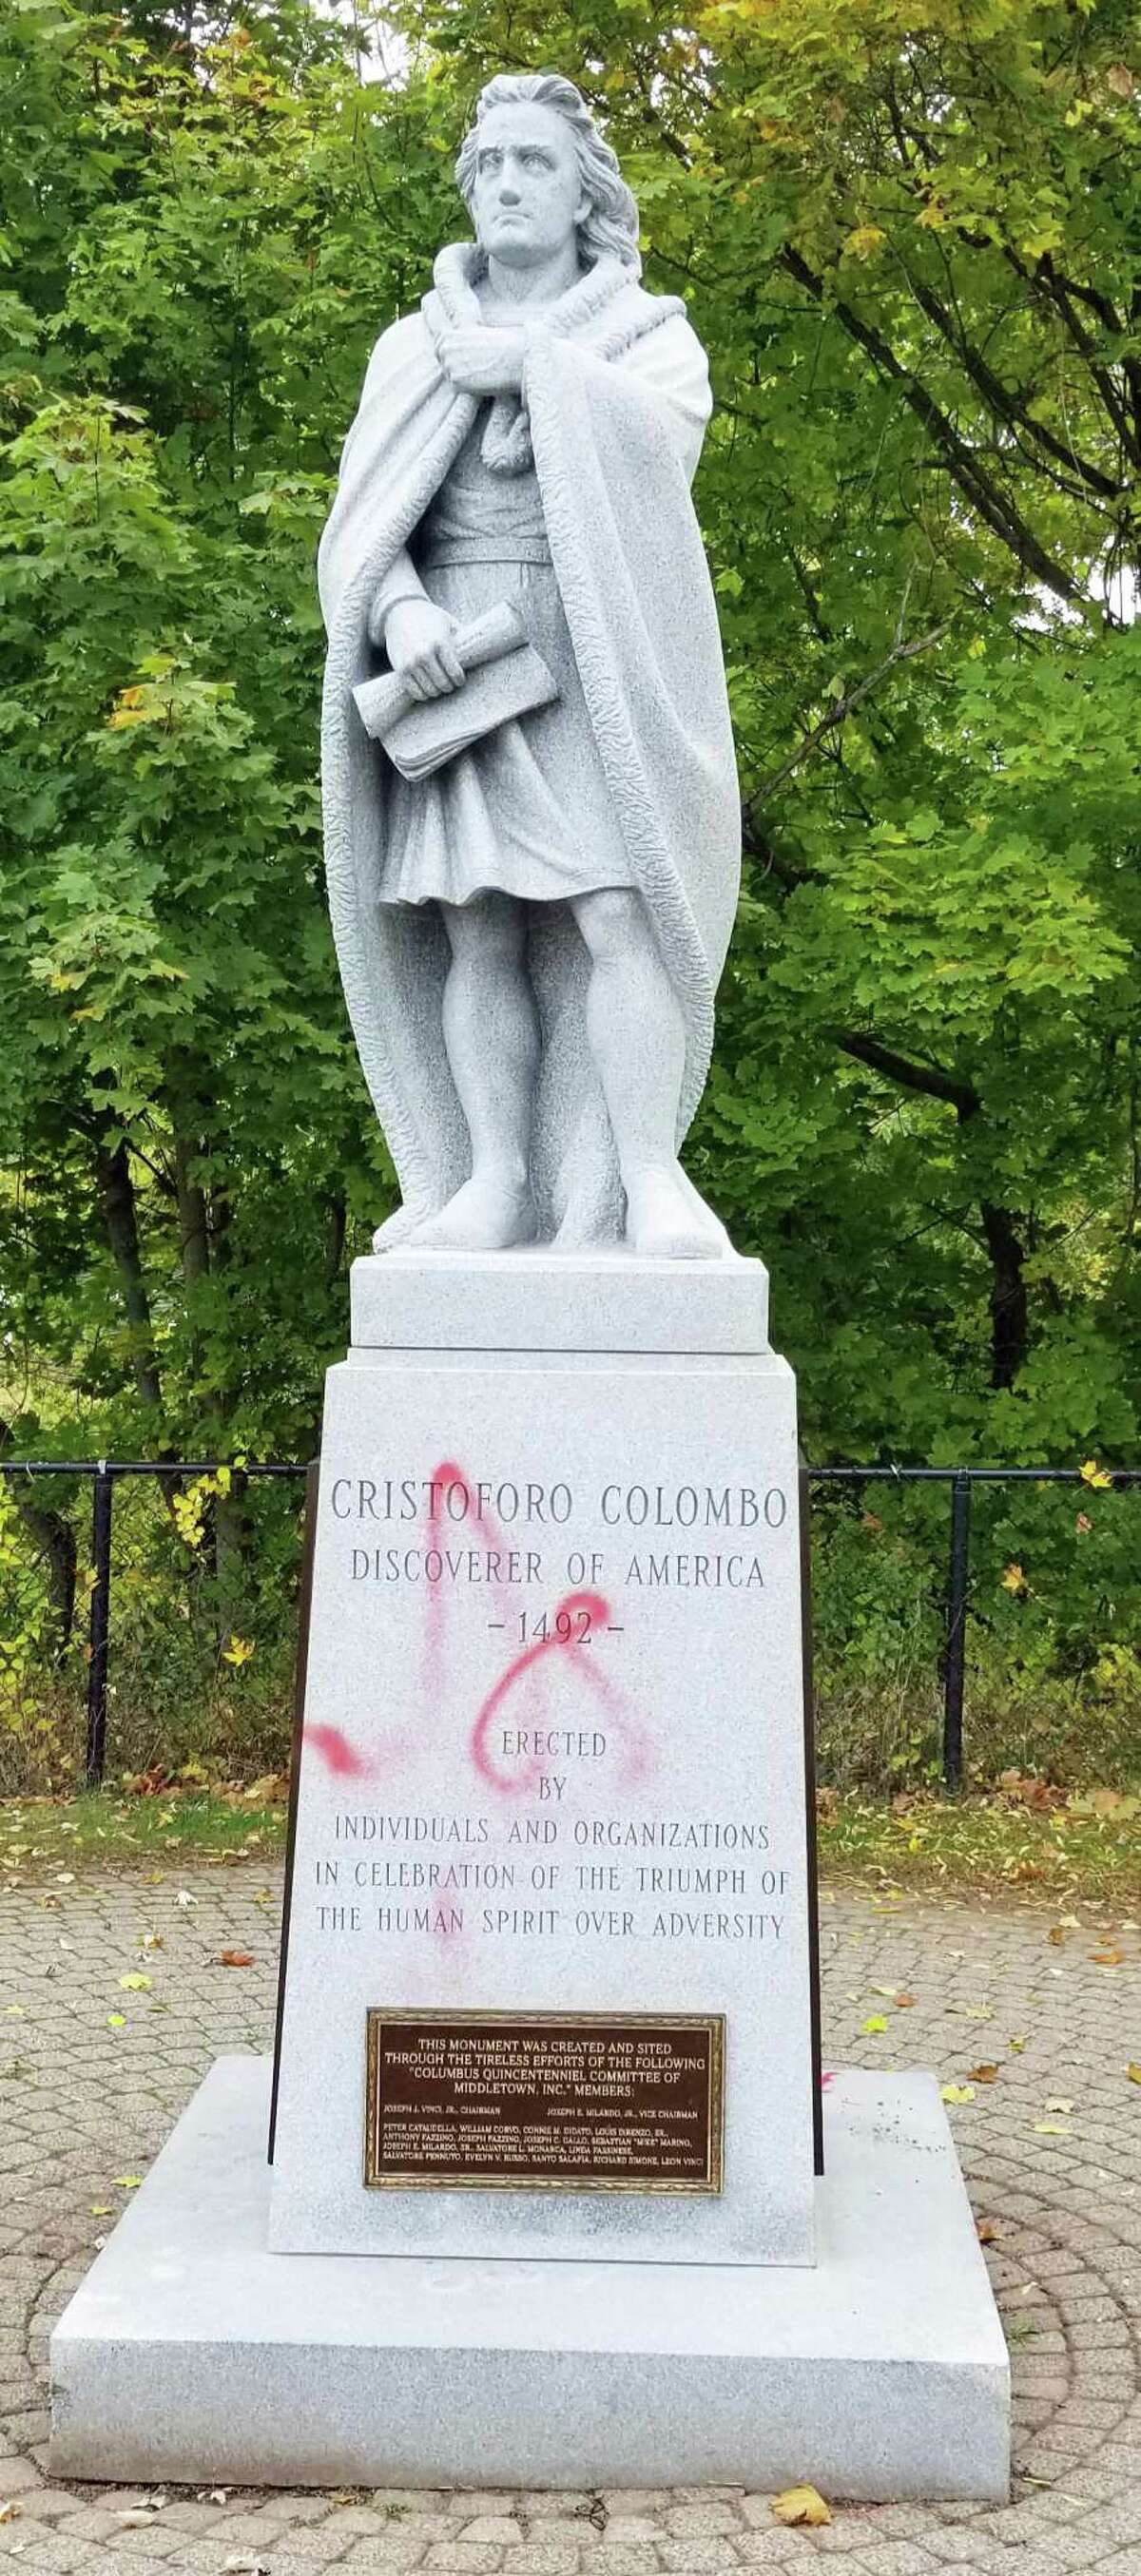 The Christopher Columbus statue at Harbor Park in Middletown was vandalized shortly after Columbus Day 2019 with red spray paint. The Columbus Quincentennial Committee of Middletown, whose members were either Italian immigrants or children of immigrants, established the monument on Columbus Day 1996. On Saturday, June 13, 2020 it was removed.